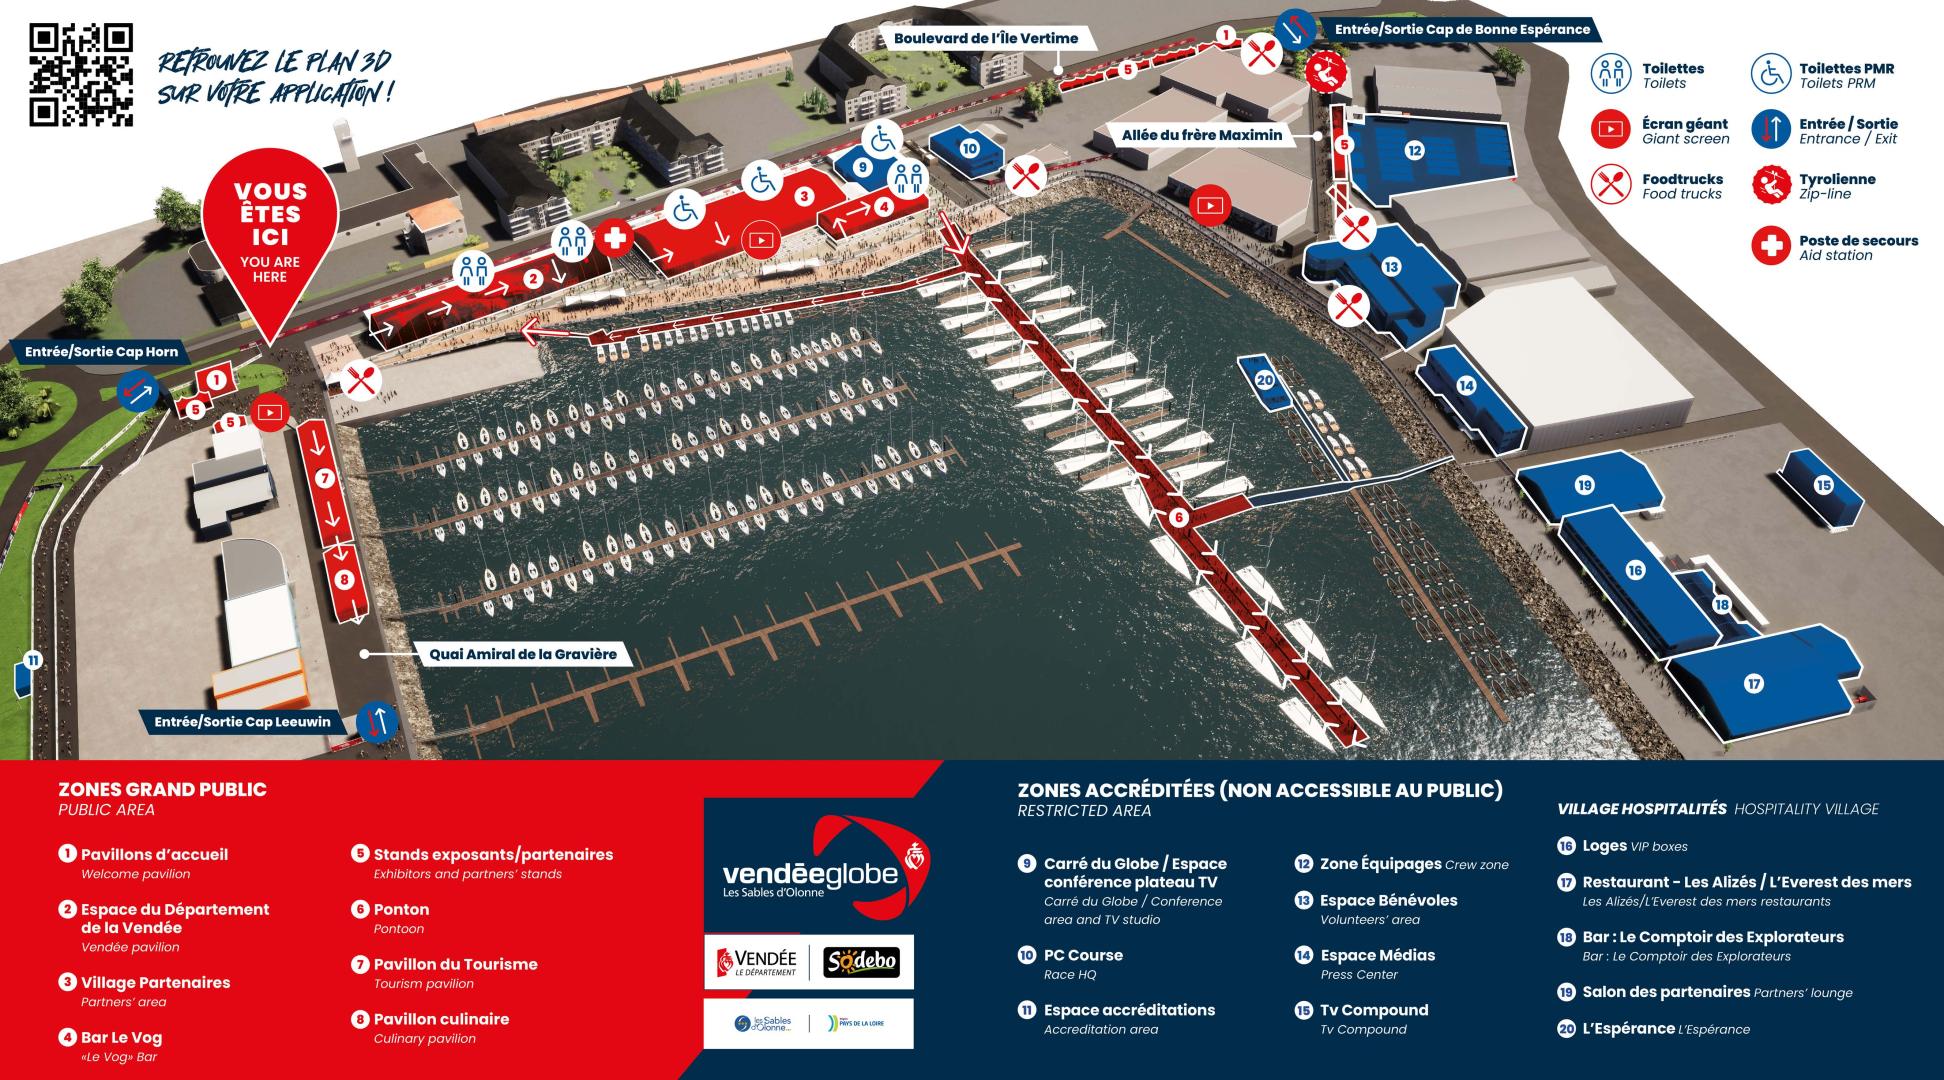 Race Village Regulations, events and access areas on start day